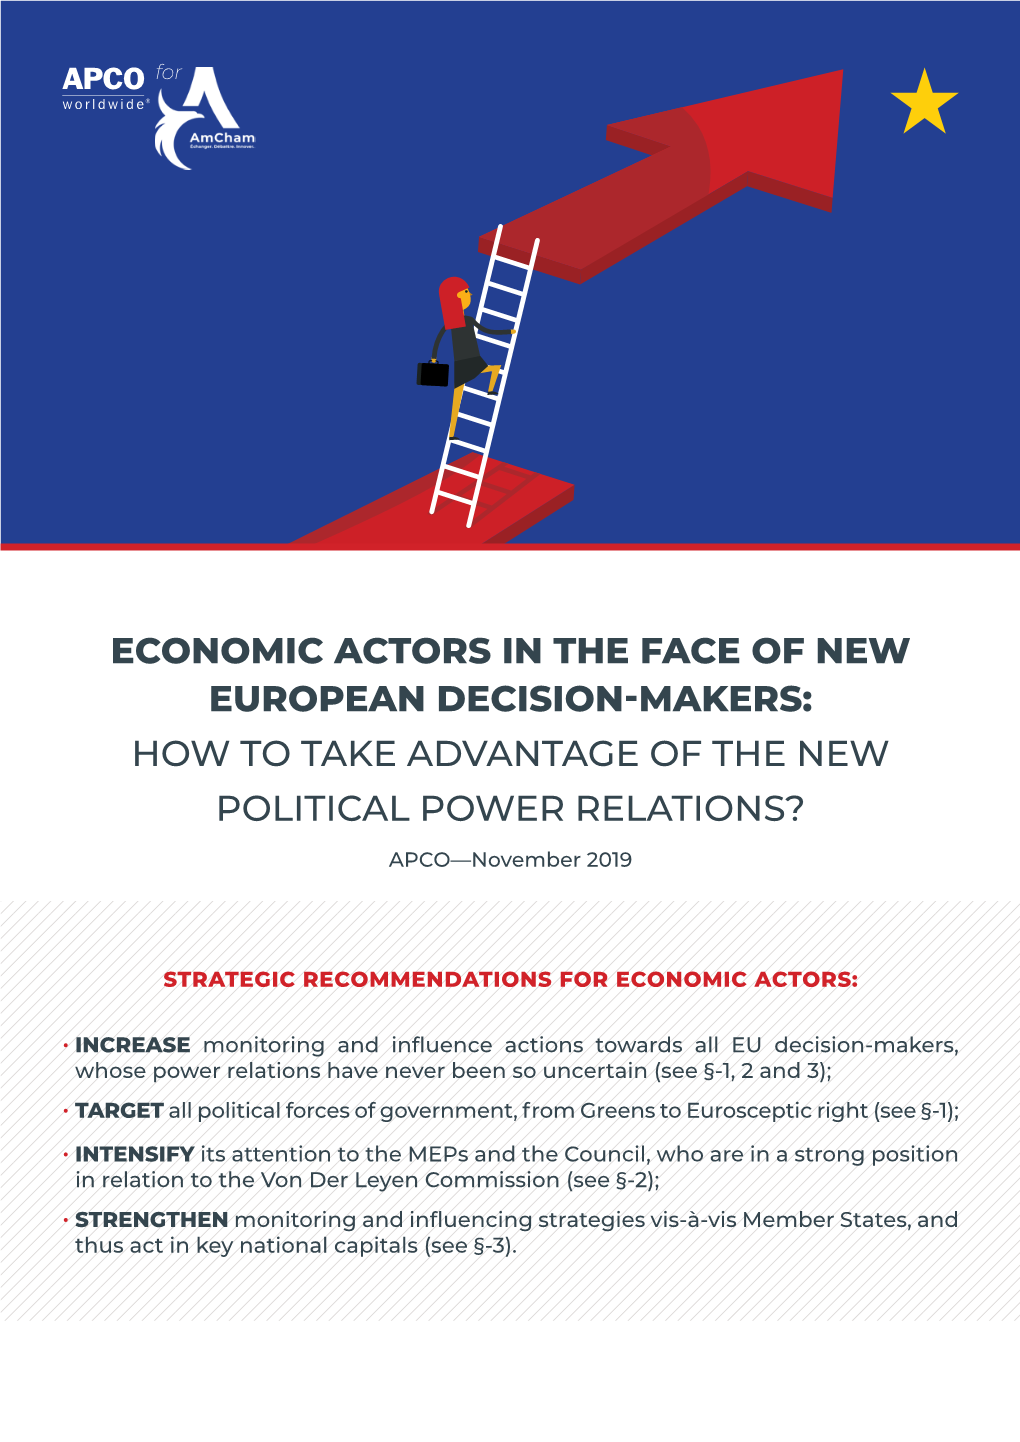 Economic Actors in the Face of New European Decision-Makers: How to Take Advantage of the New Political Power Relations?